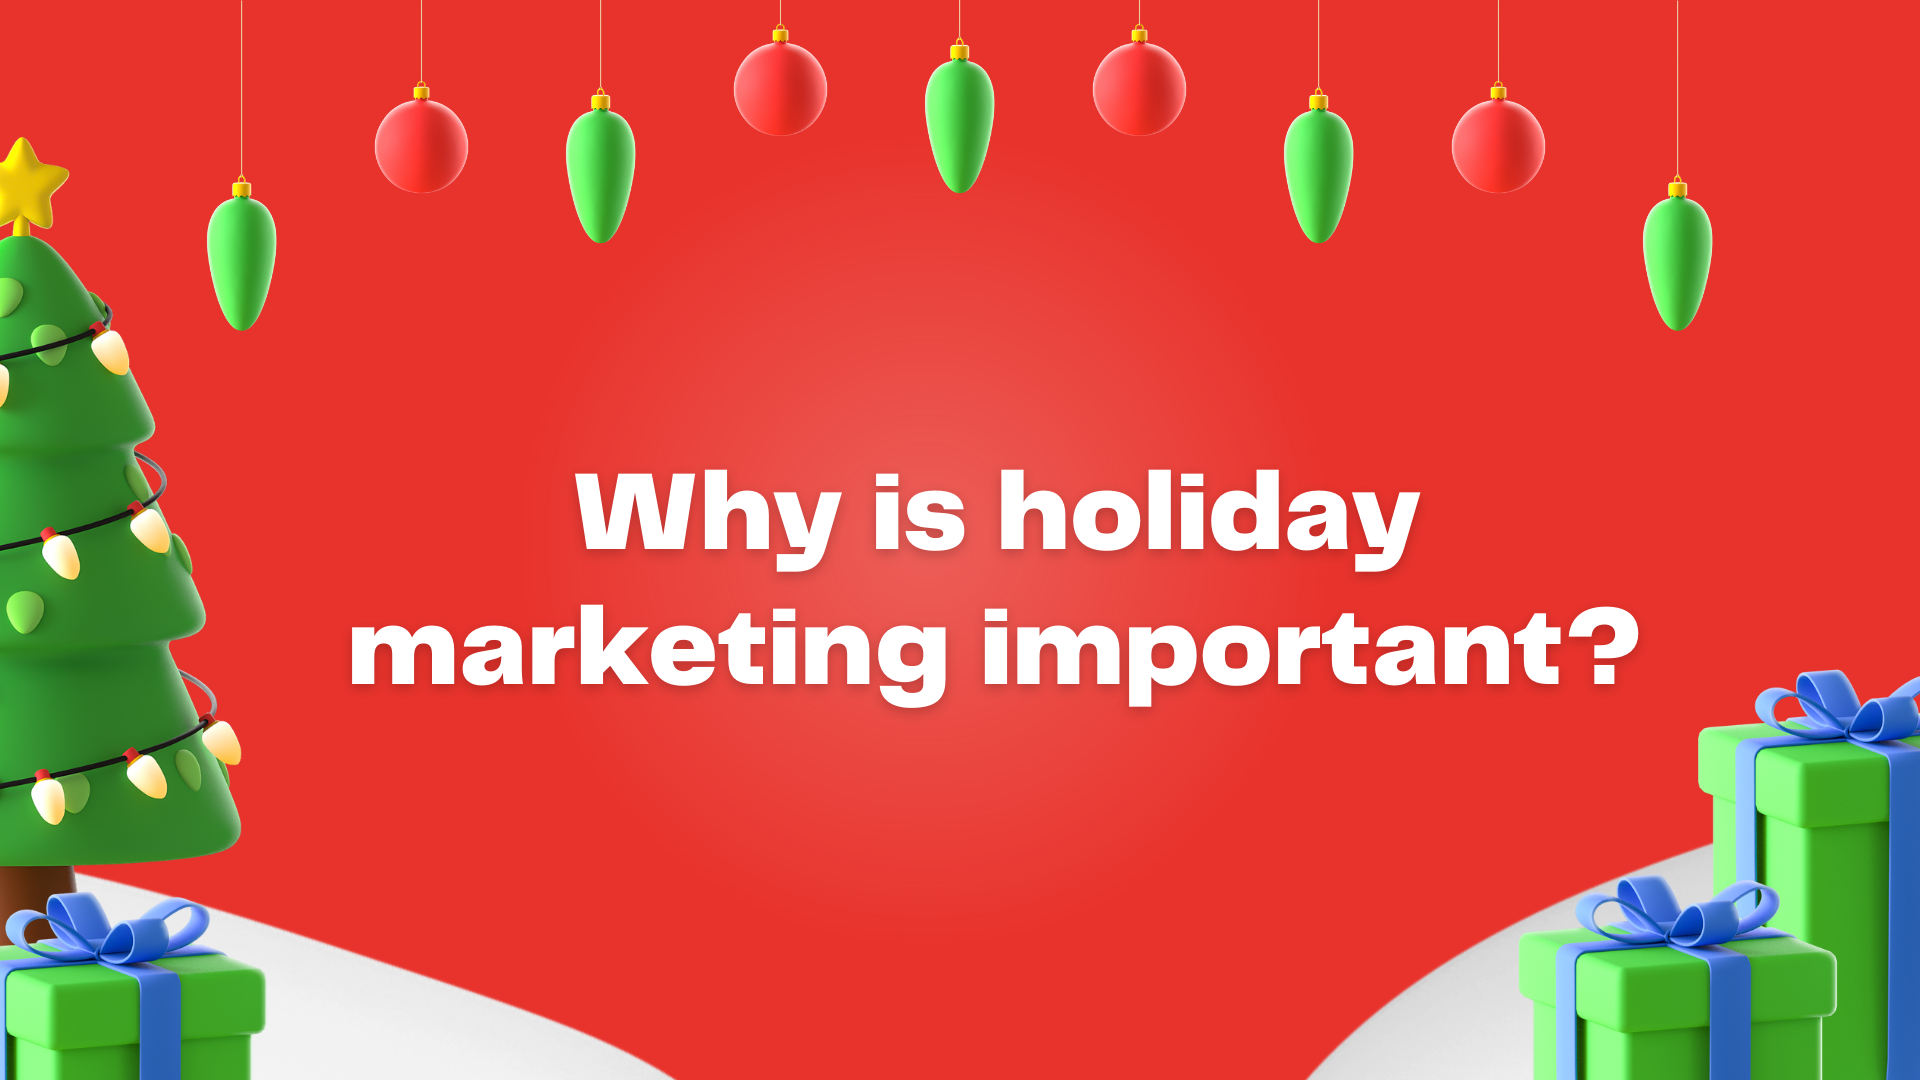 Why is holiday marketing important